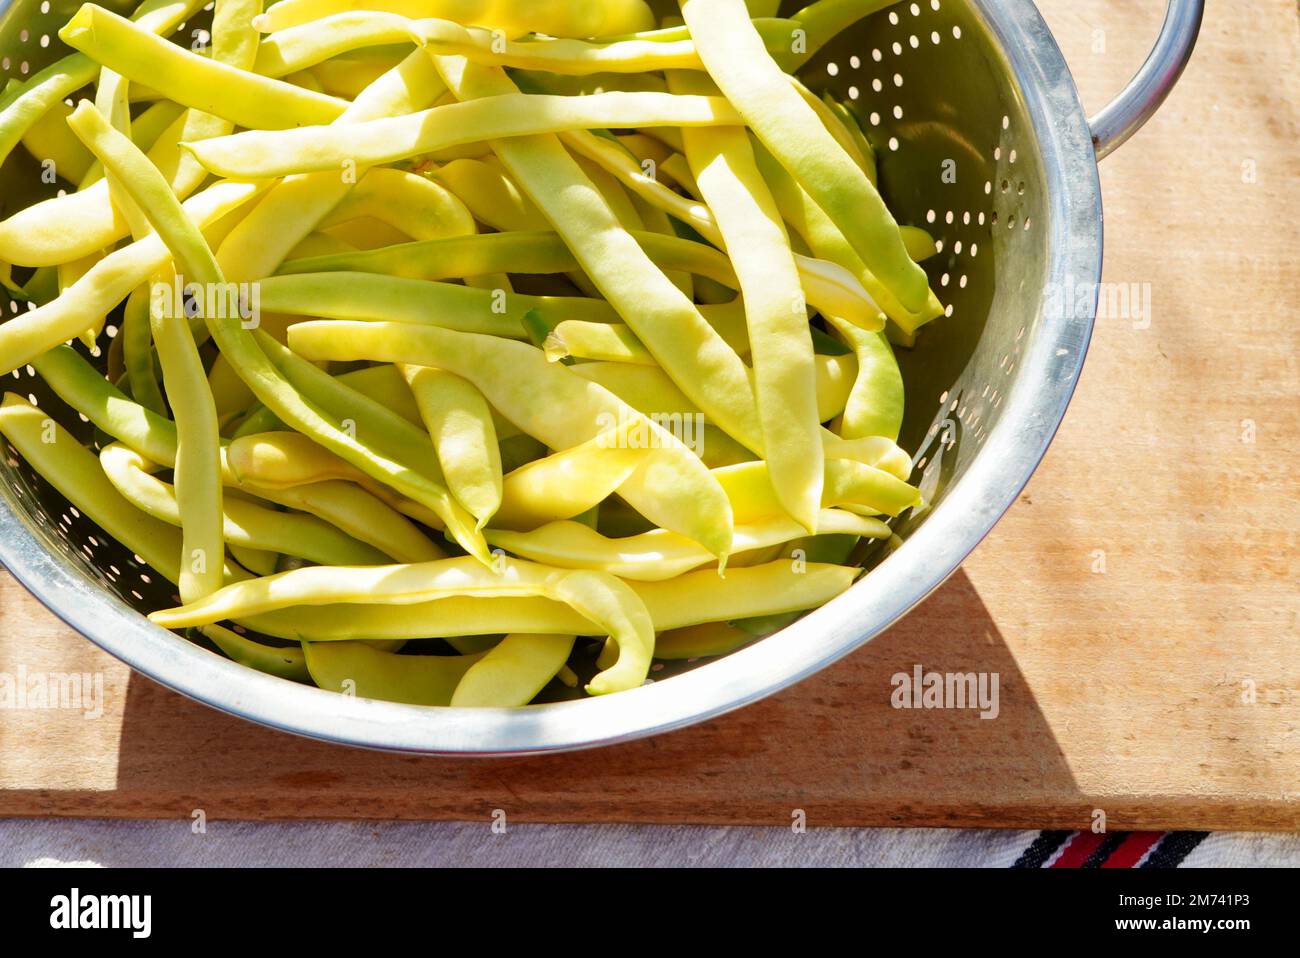 Closeup of fresh harvest yellow beans flat pods in stainless steel strainer on wooden trencher Stock Photo